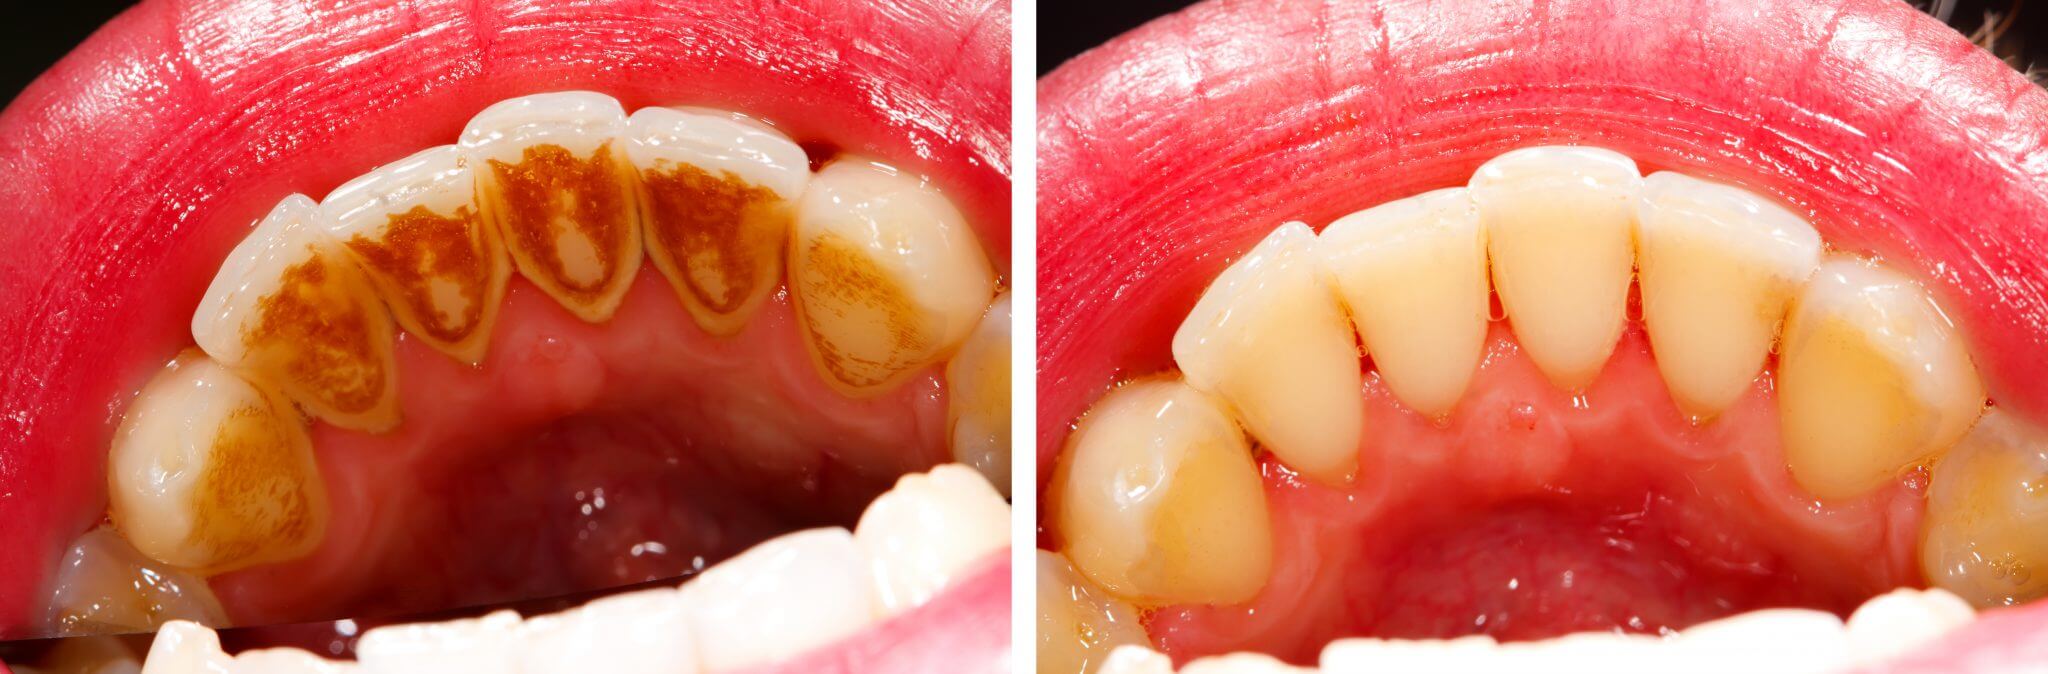 periodontitis treatment and gum infection before and after